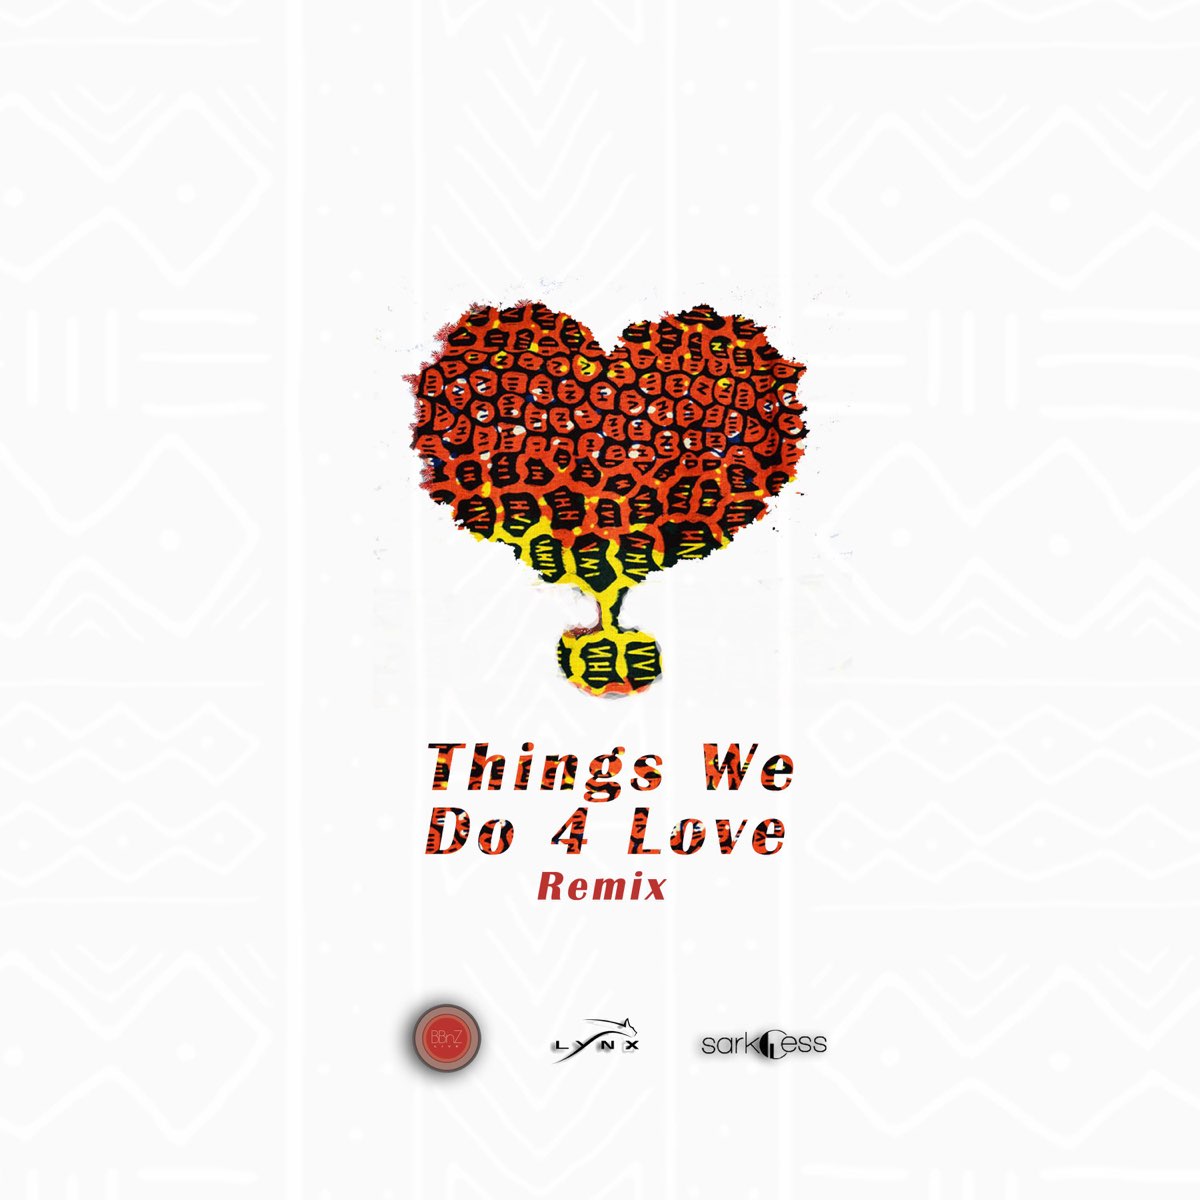 Remix love 1. Love Remix. Jazzamor / things we do for Love обложка. Love things. The Sounds things we do for Love.